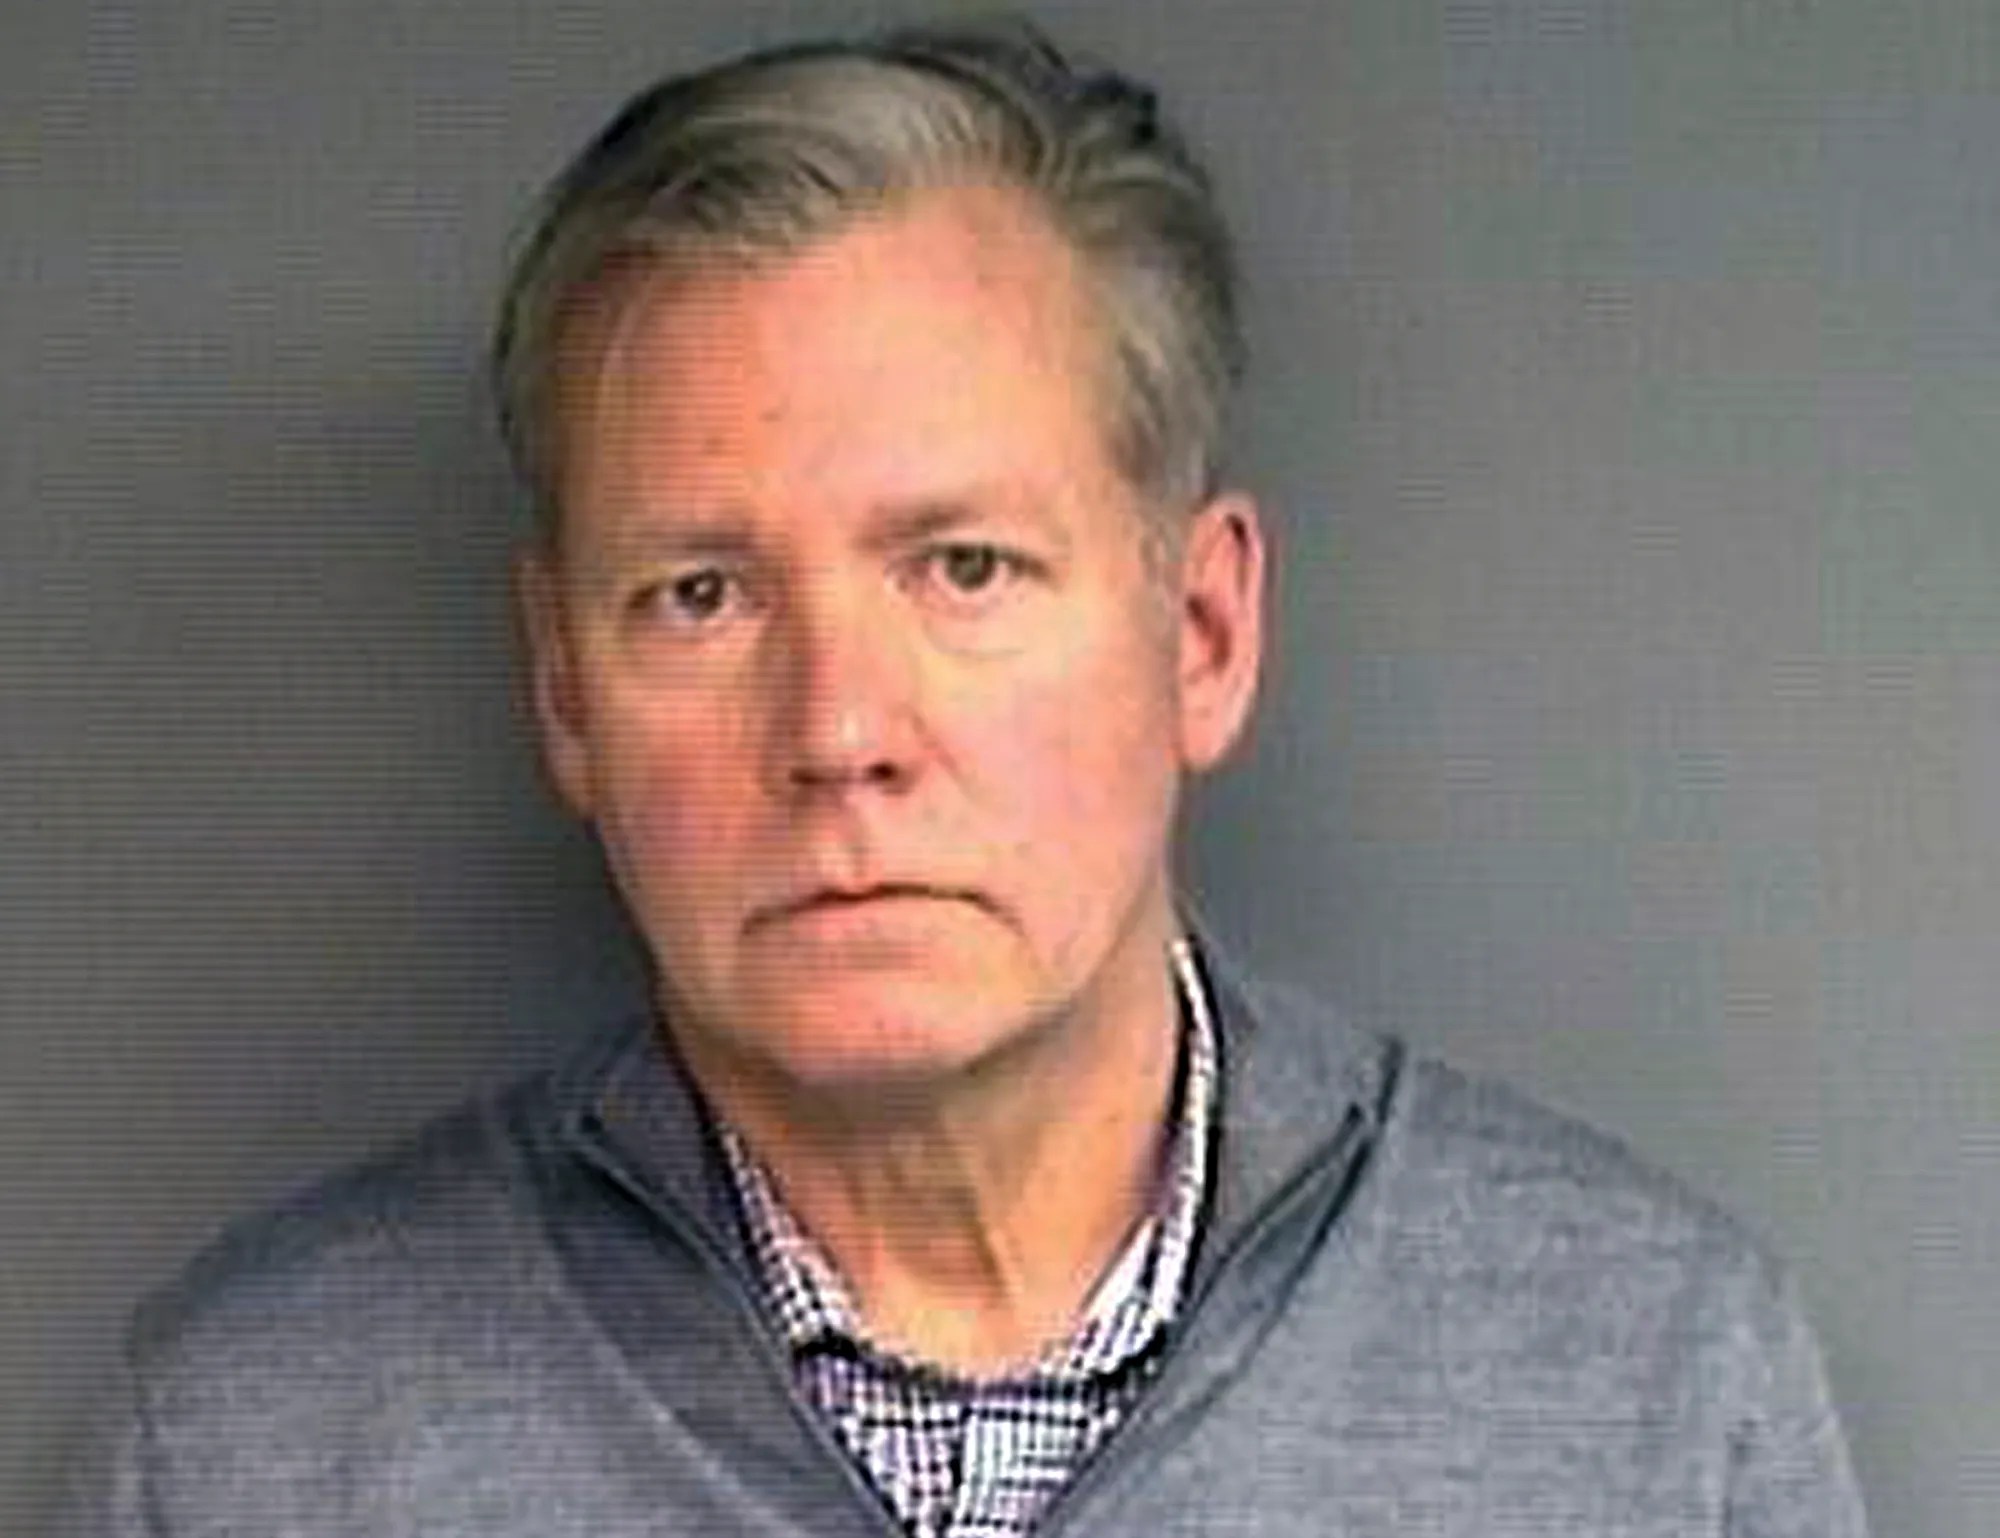 'To Catch a Predator' host Chris Hansen arrested for bounced check